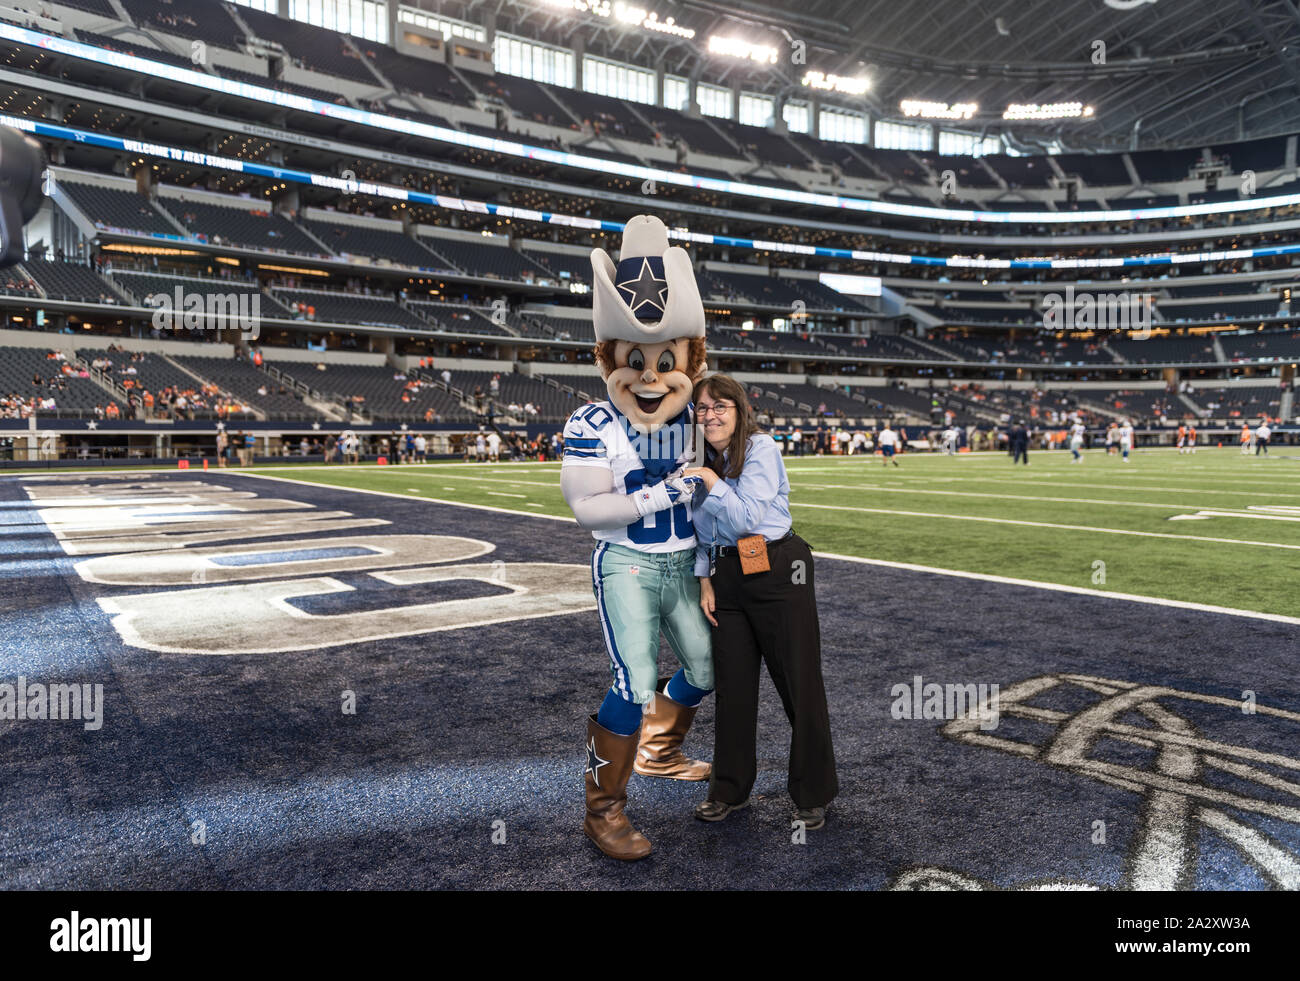 Rowdy, an ever-smiling buckaroo, has been the official mascot of the Dallas Cowboys of the National Football League since 1996. Here he welcomes photographer Carol M. Highsmith to the Cowboys' home field, AT&T Stadium, in Arlington, Texas Stock Photo